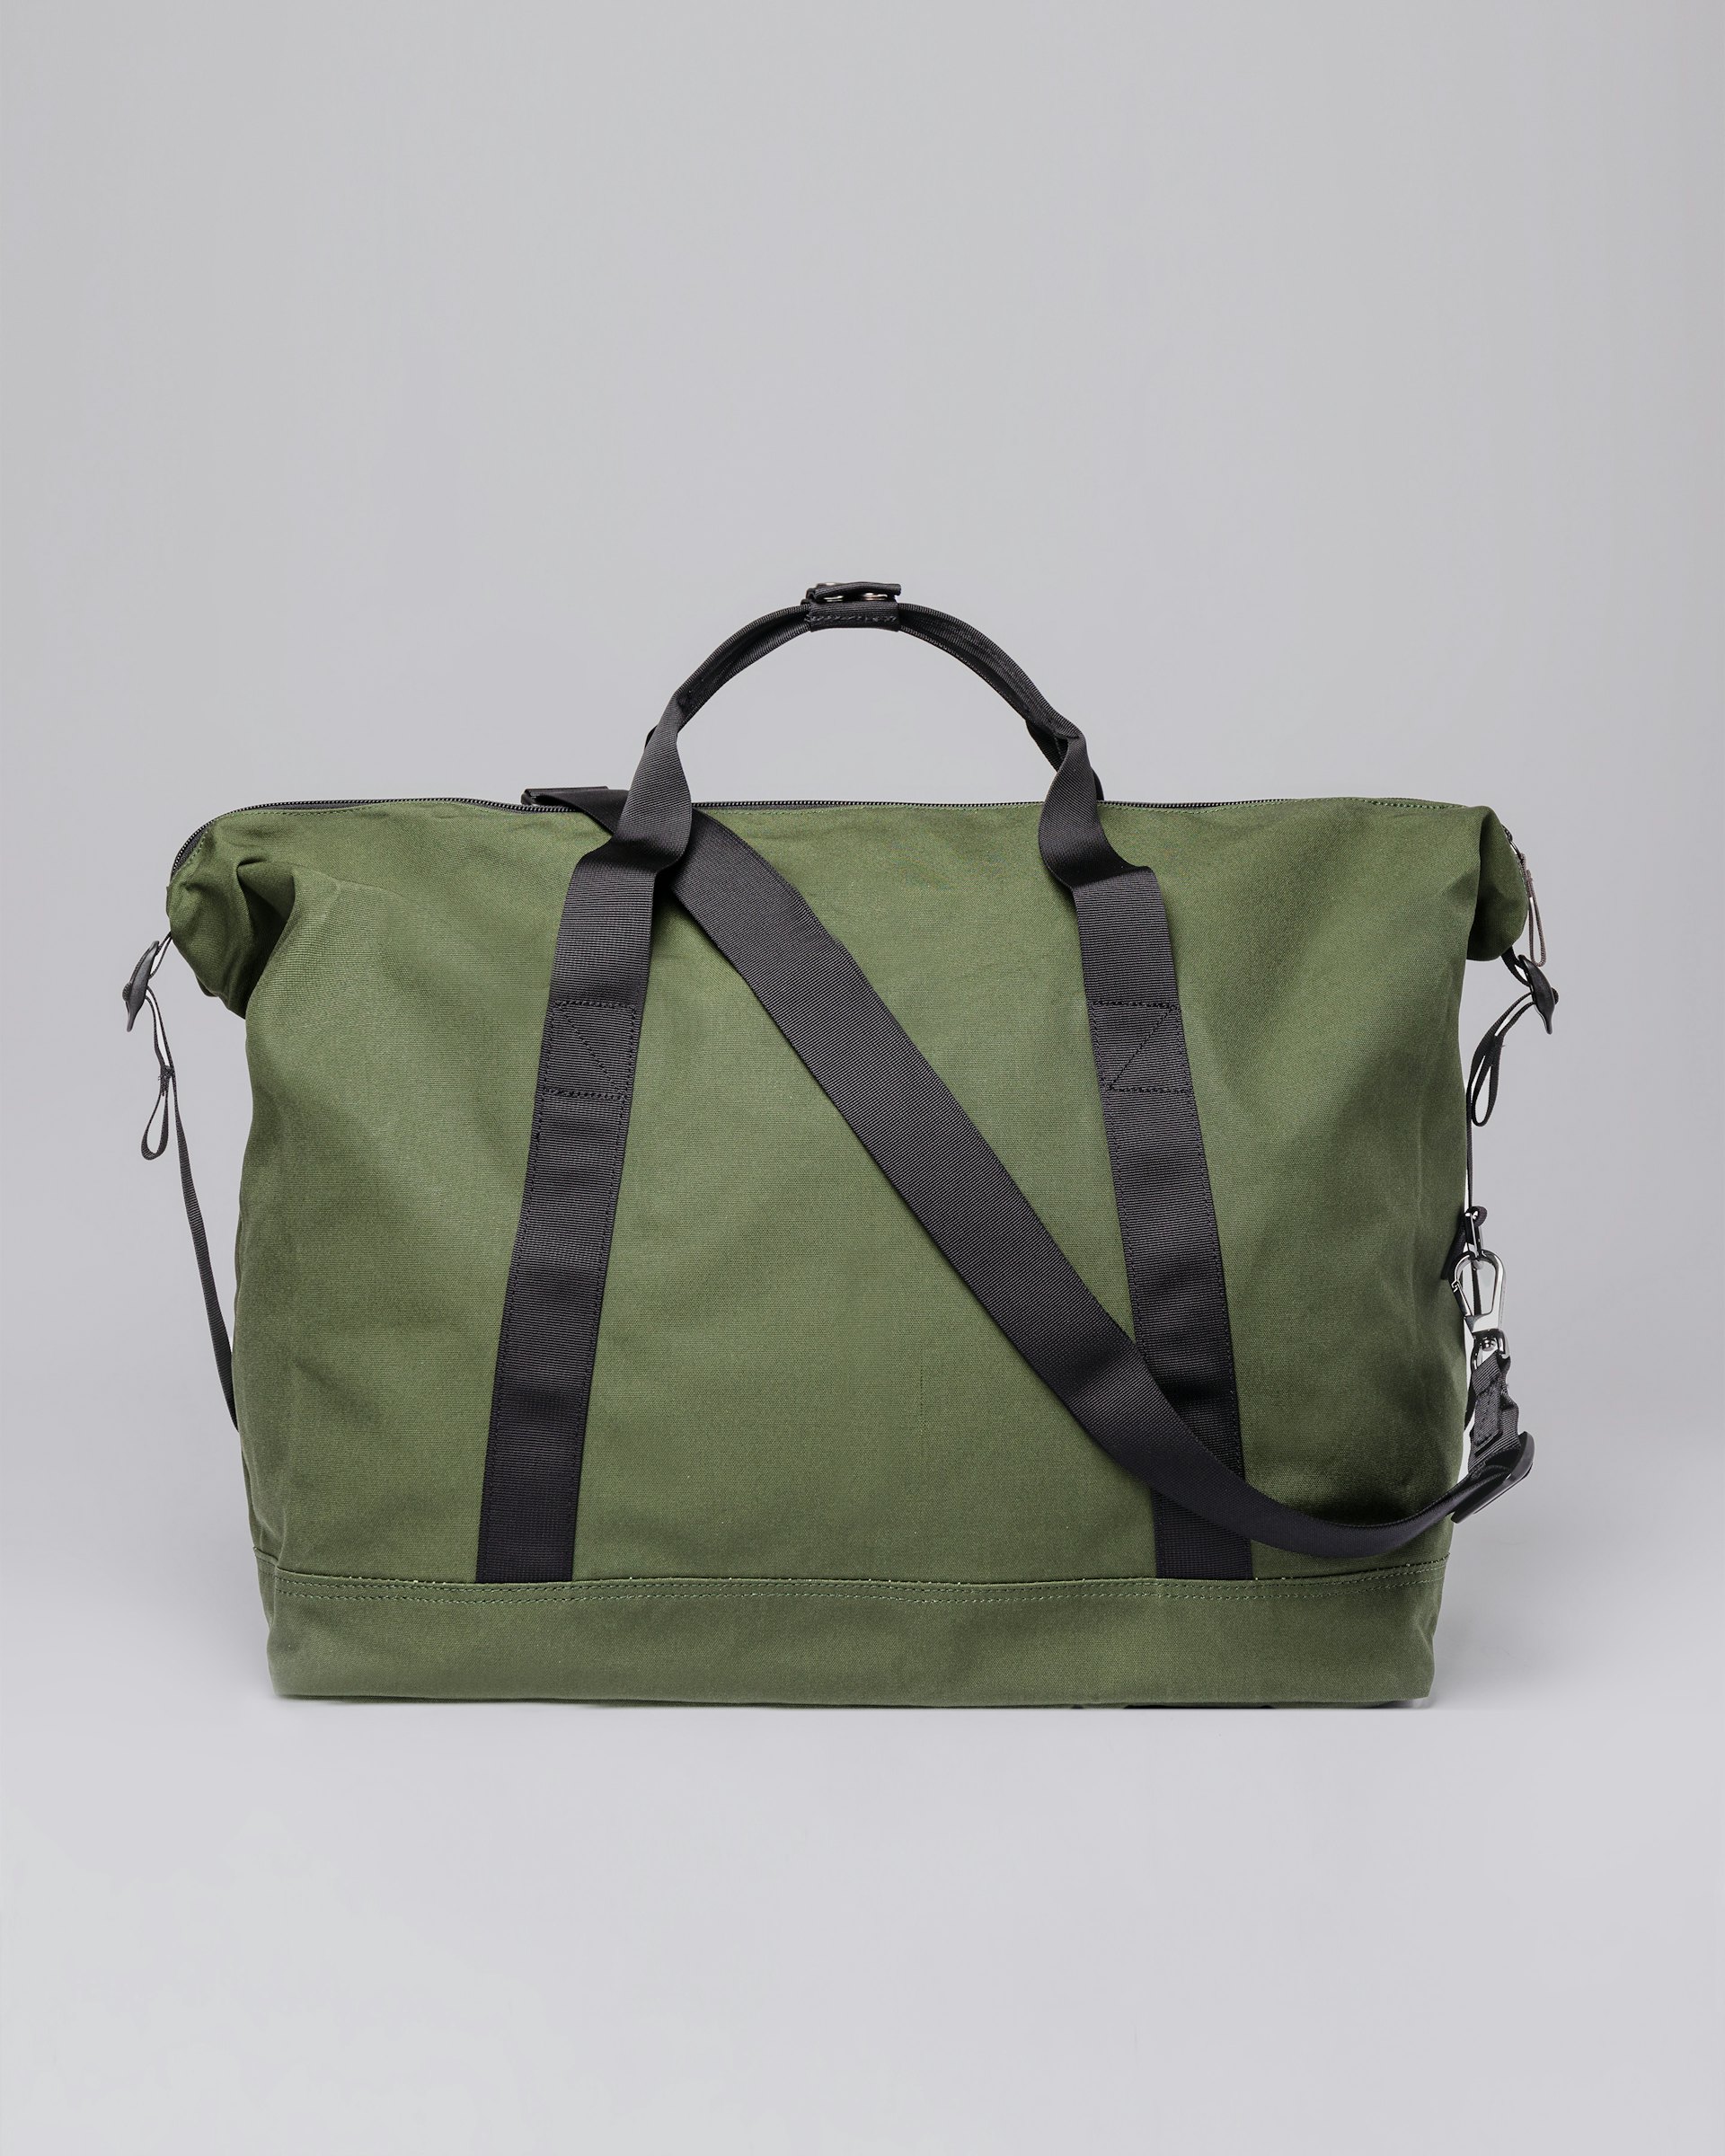 Sture belongs to the category Briefcases and is in color dawn green (3 of 5)